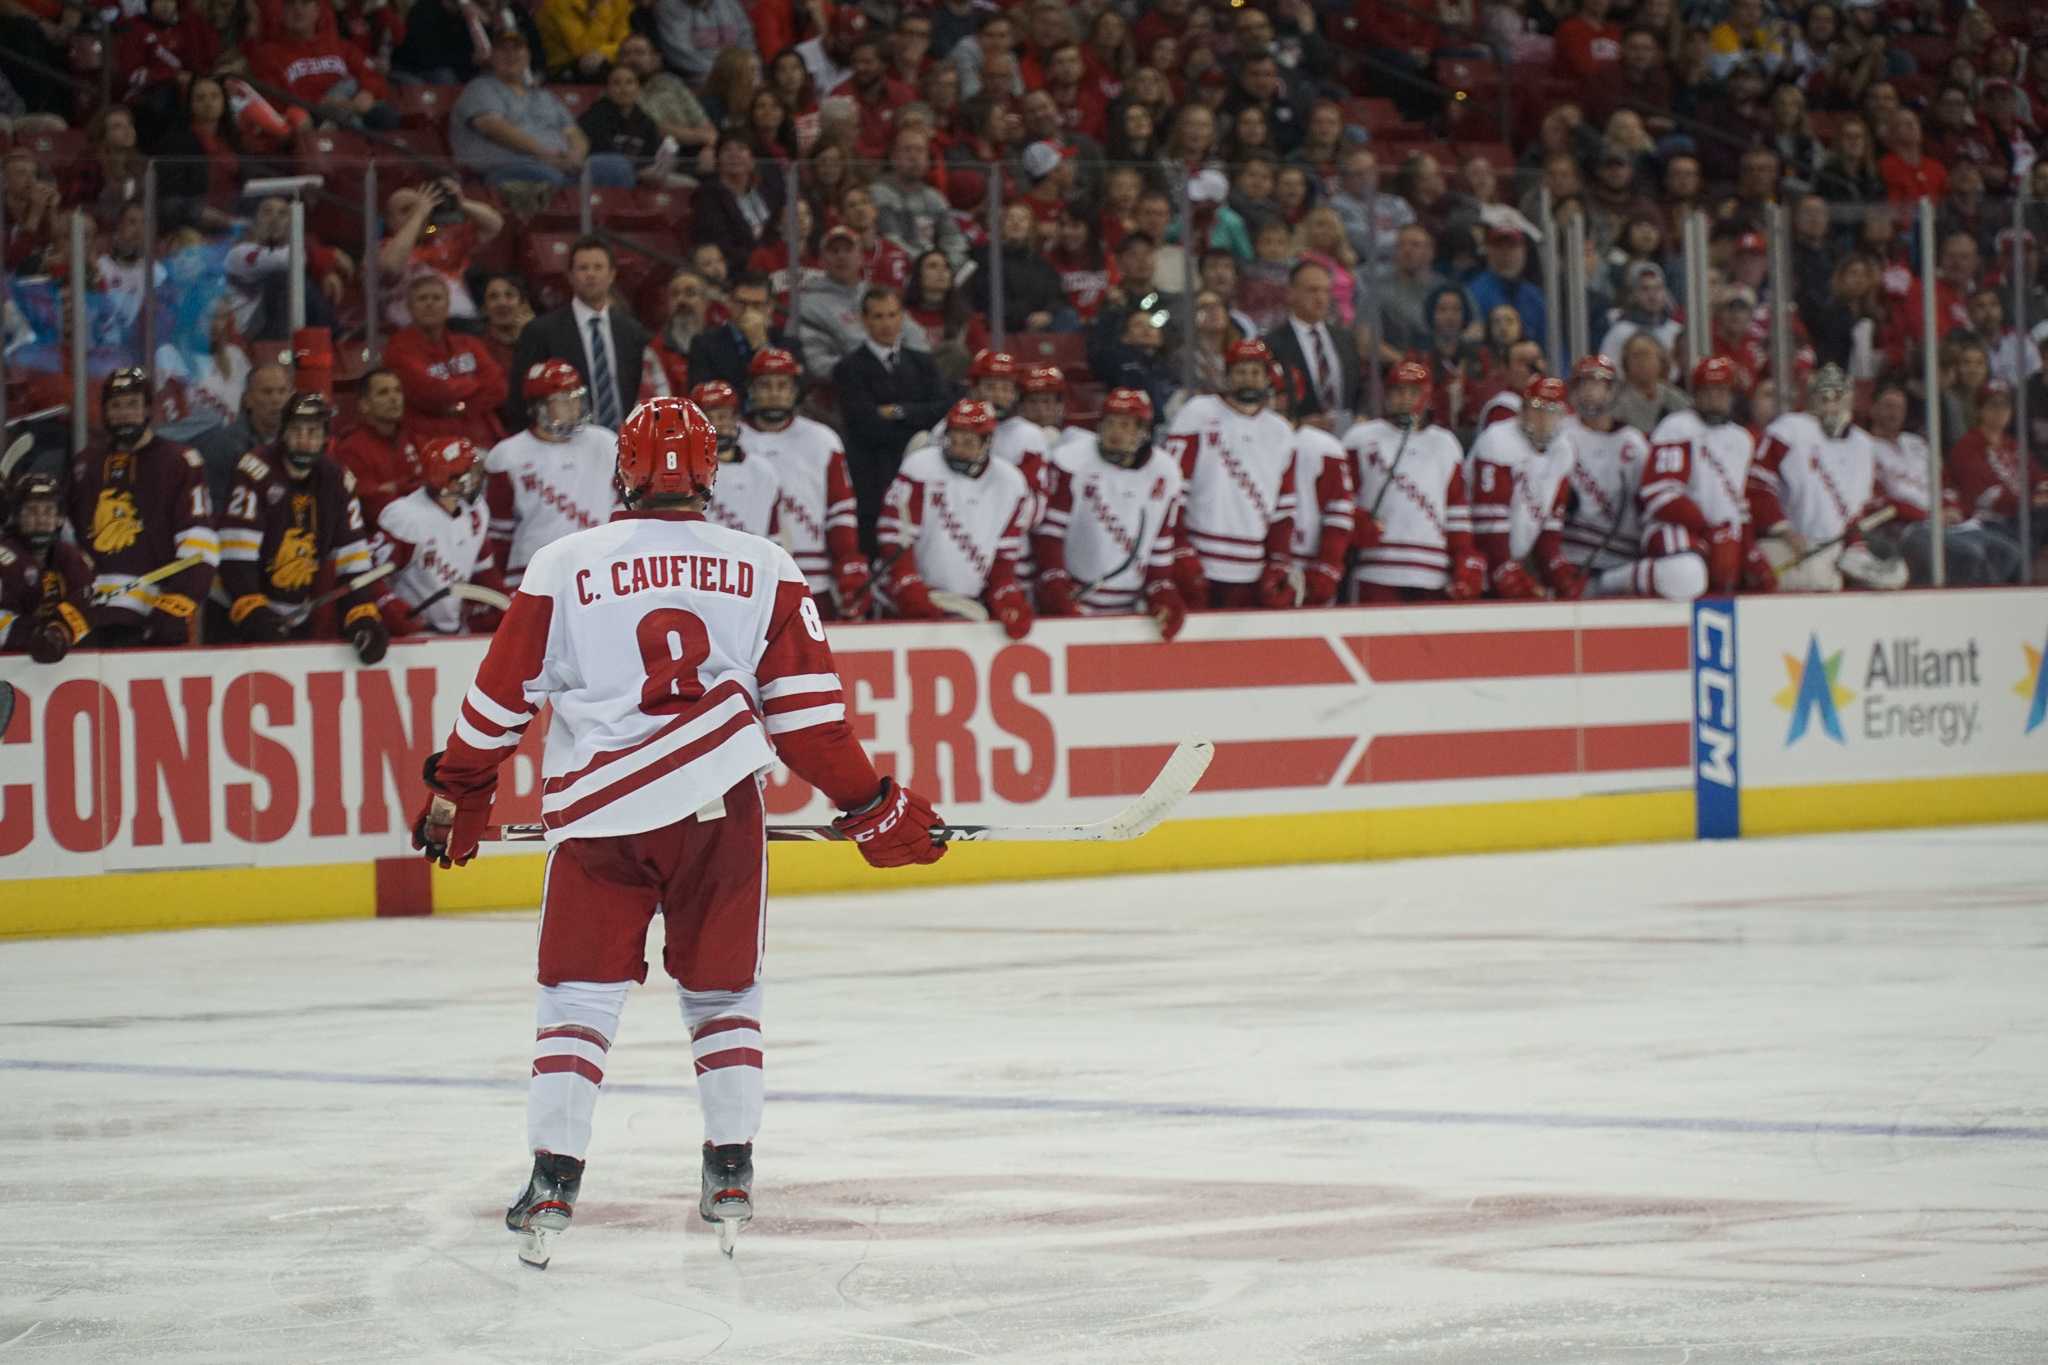 Men's Hockey Cole Caufield opts to stay with Badgers as refined Big